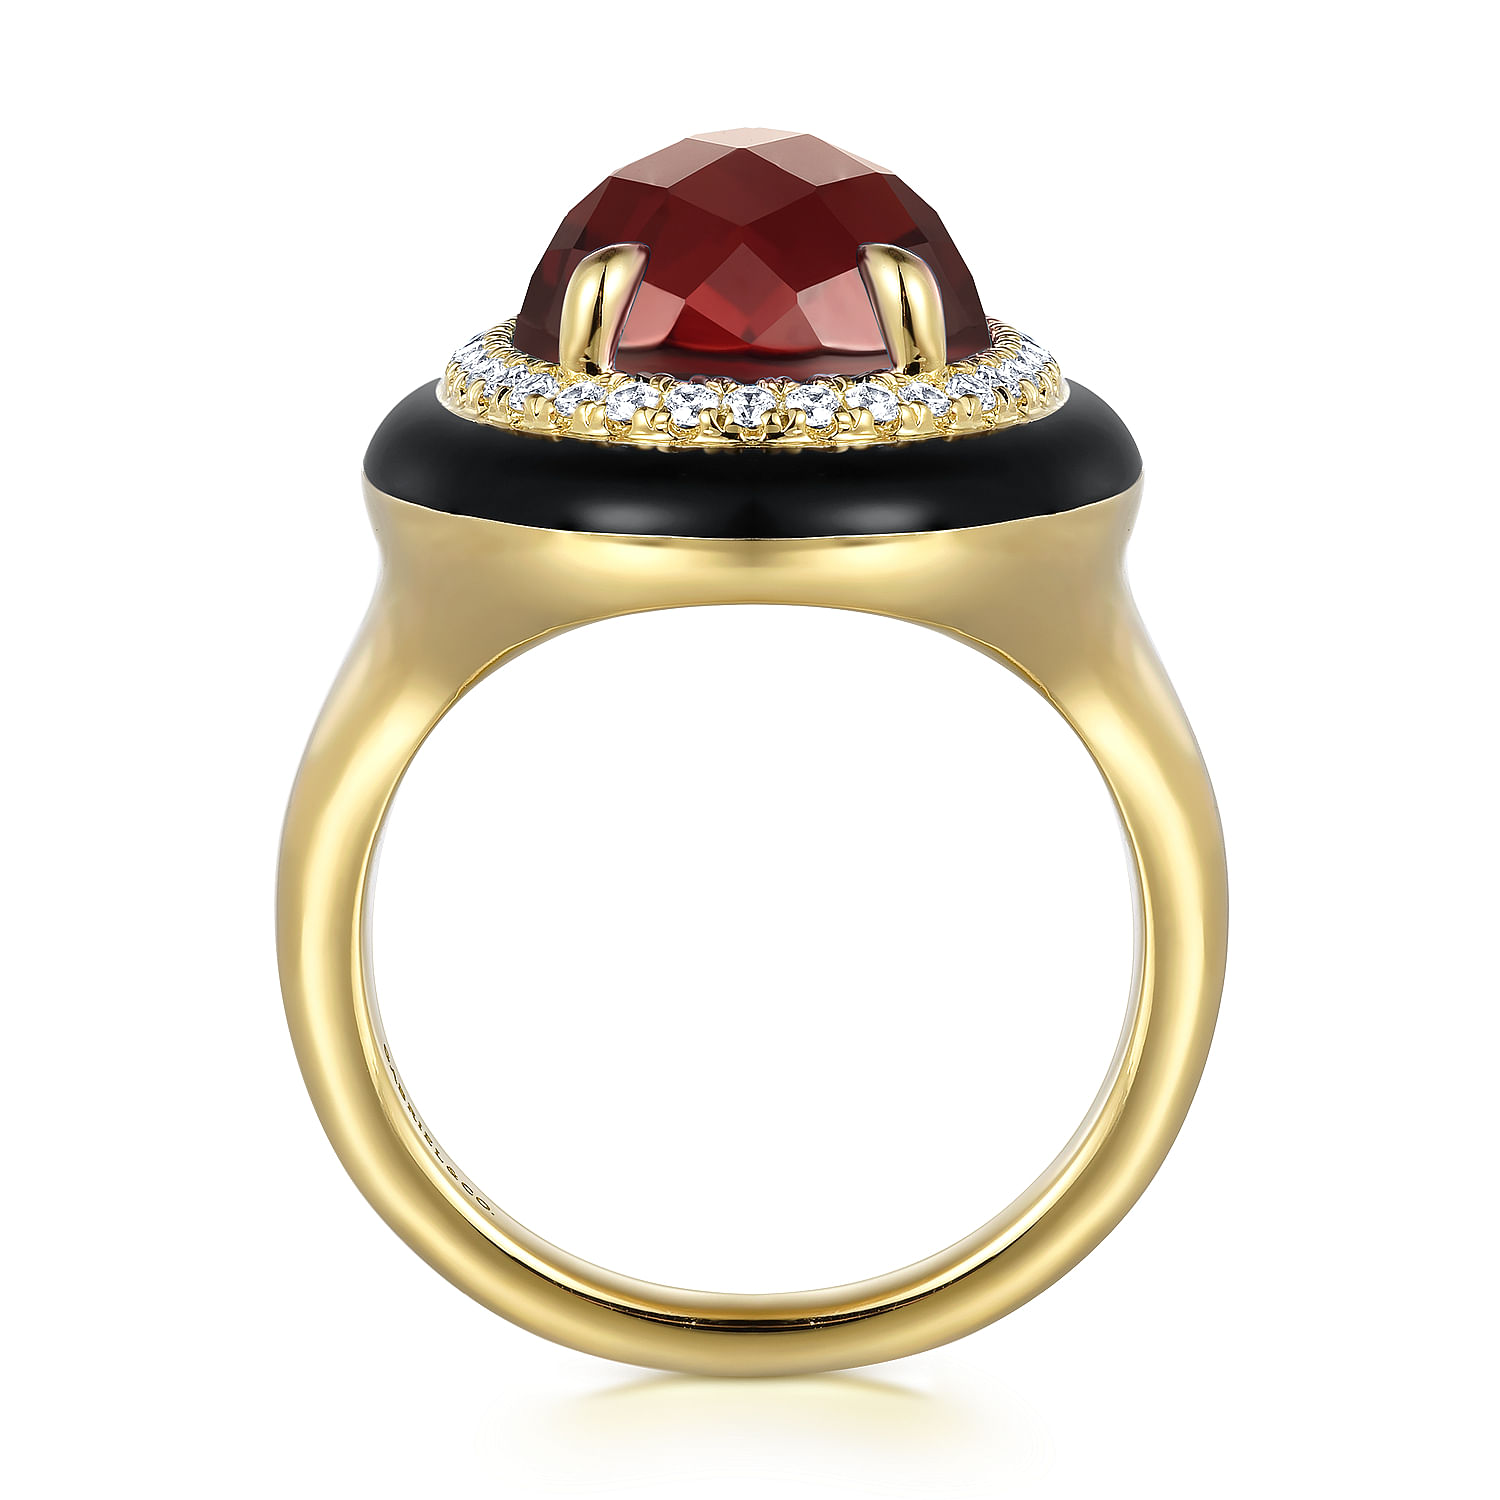 14K Yellow Gold Diamond and Oval Shape Garnet Ladies Ring With Flower Pattern J-Back and Black Enamel